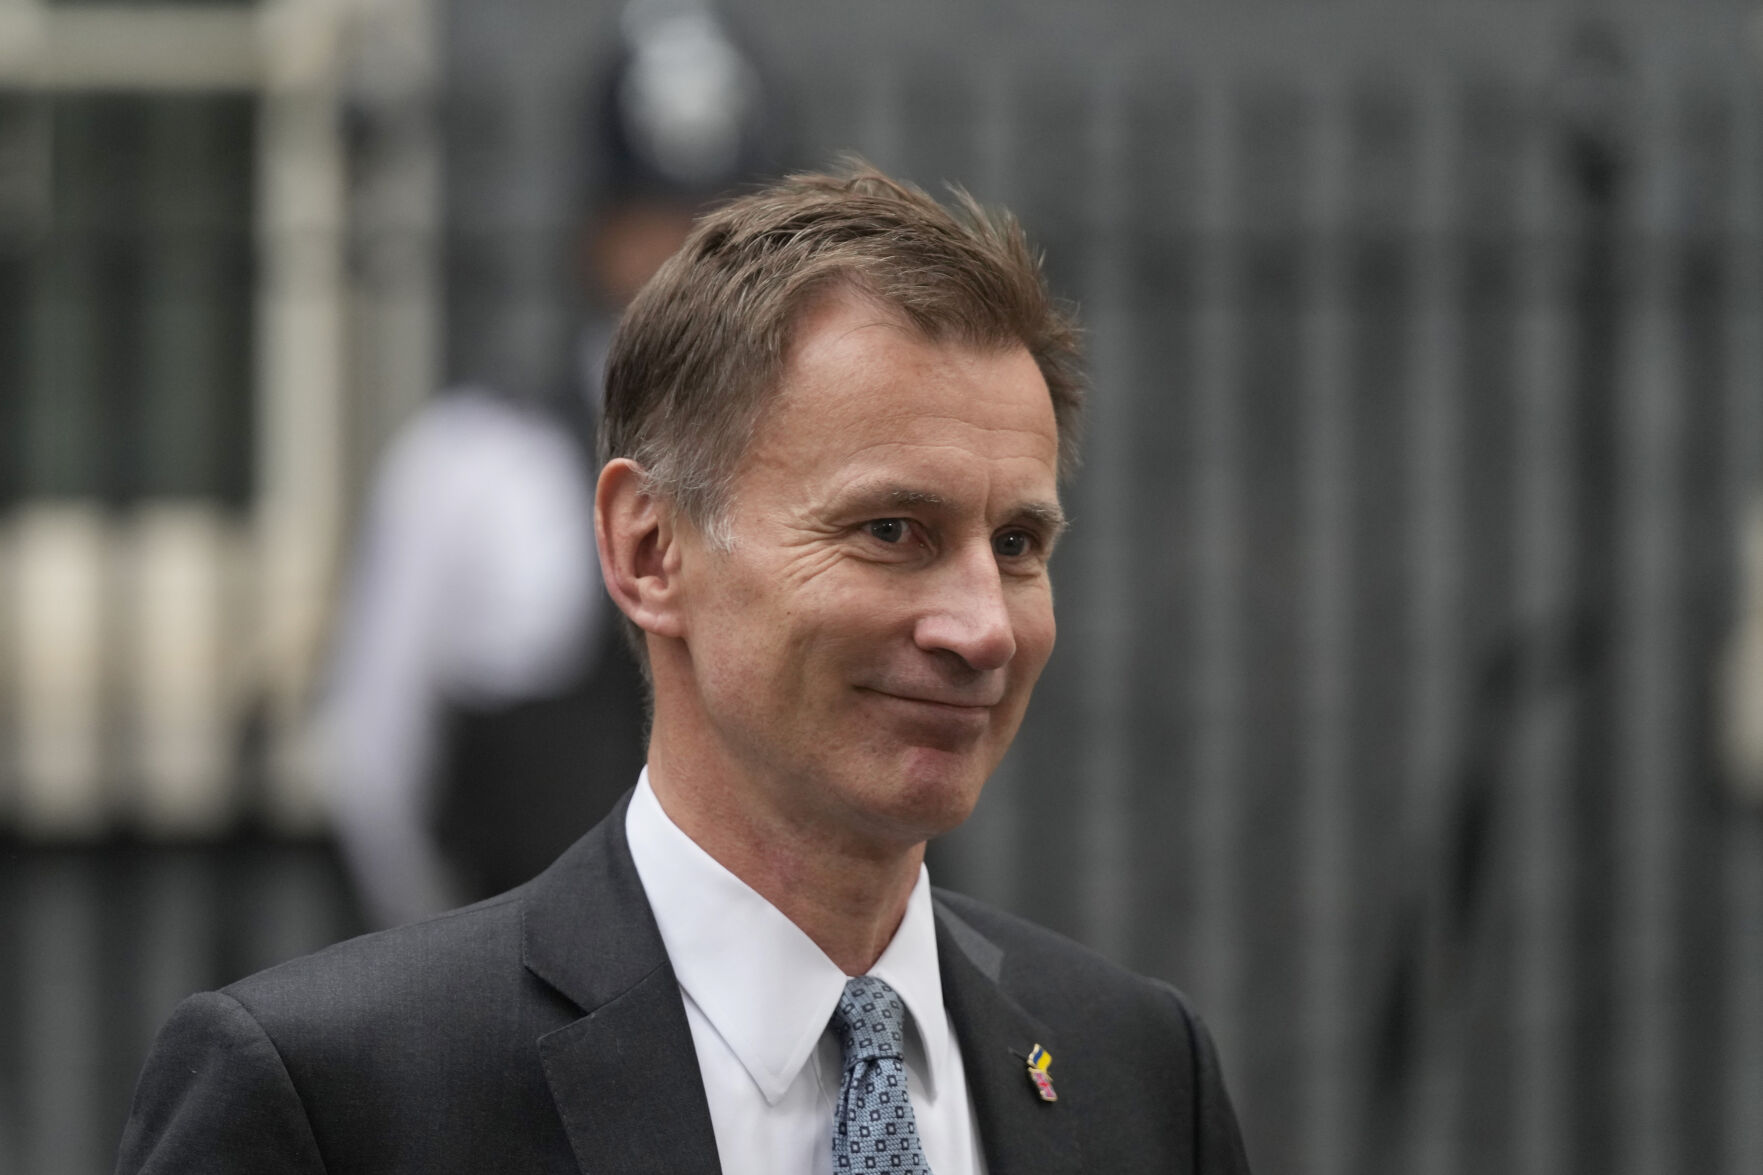 <p>Jeremy Hunt, the Chancellor of the Exchequer leaves 10 Downing Street following a Cabinet meeting, the first held by the new British Prime Minister Rishi Sunak, in London, Wednesday, Oct. 26, 2022. Sunak was elected by the ruling Conservative party to replace Liz Truss who resigned. (AP Photo/Frank Augstein)</p>   PHOTO CREDIT: Frank Augstein - stringer, AP